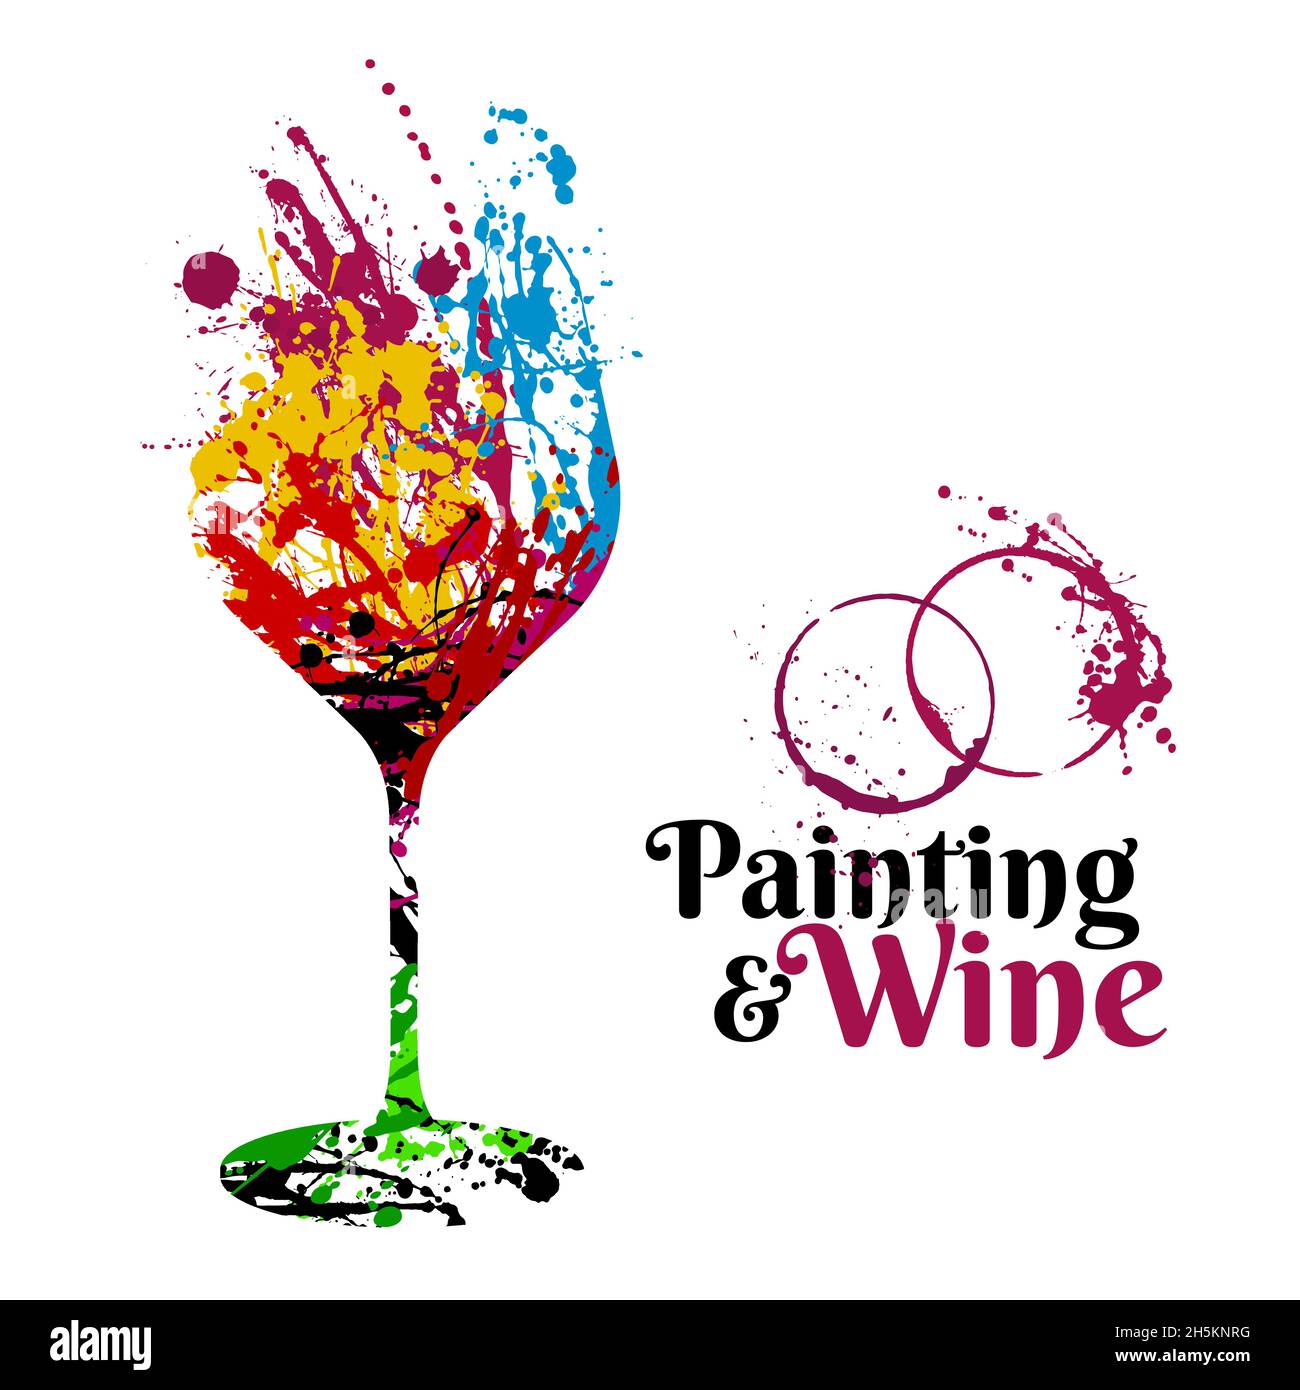 Illustration of wine glass with colorful paint stains. For event promotion with wine and art. Artistic illustration. Vector Stock Vector